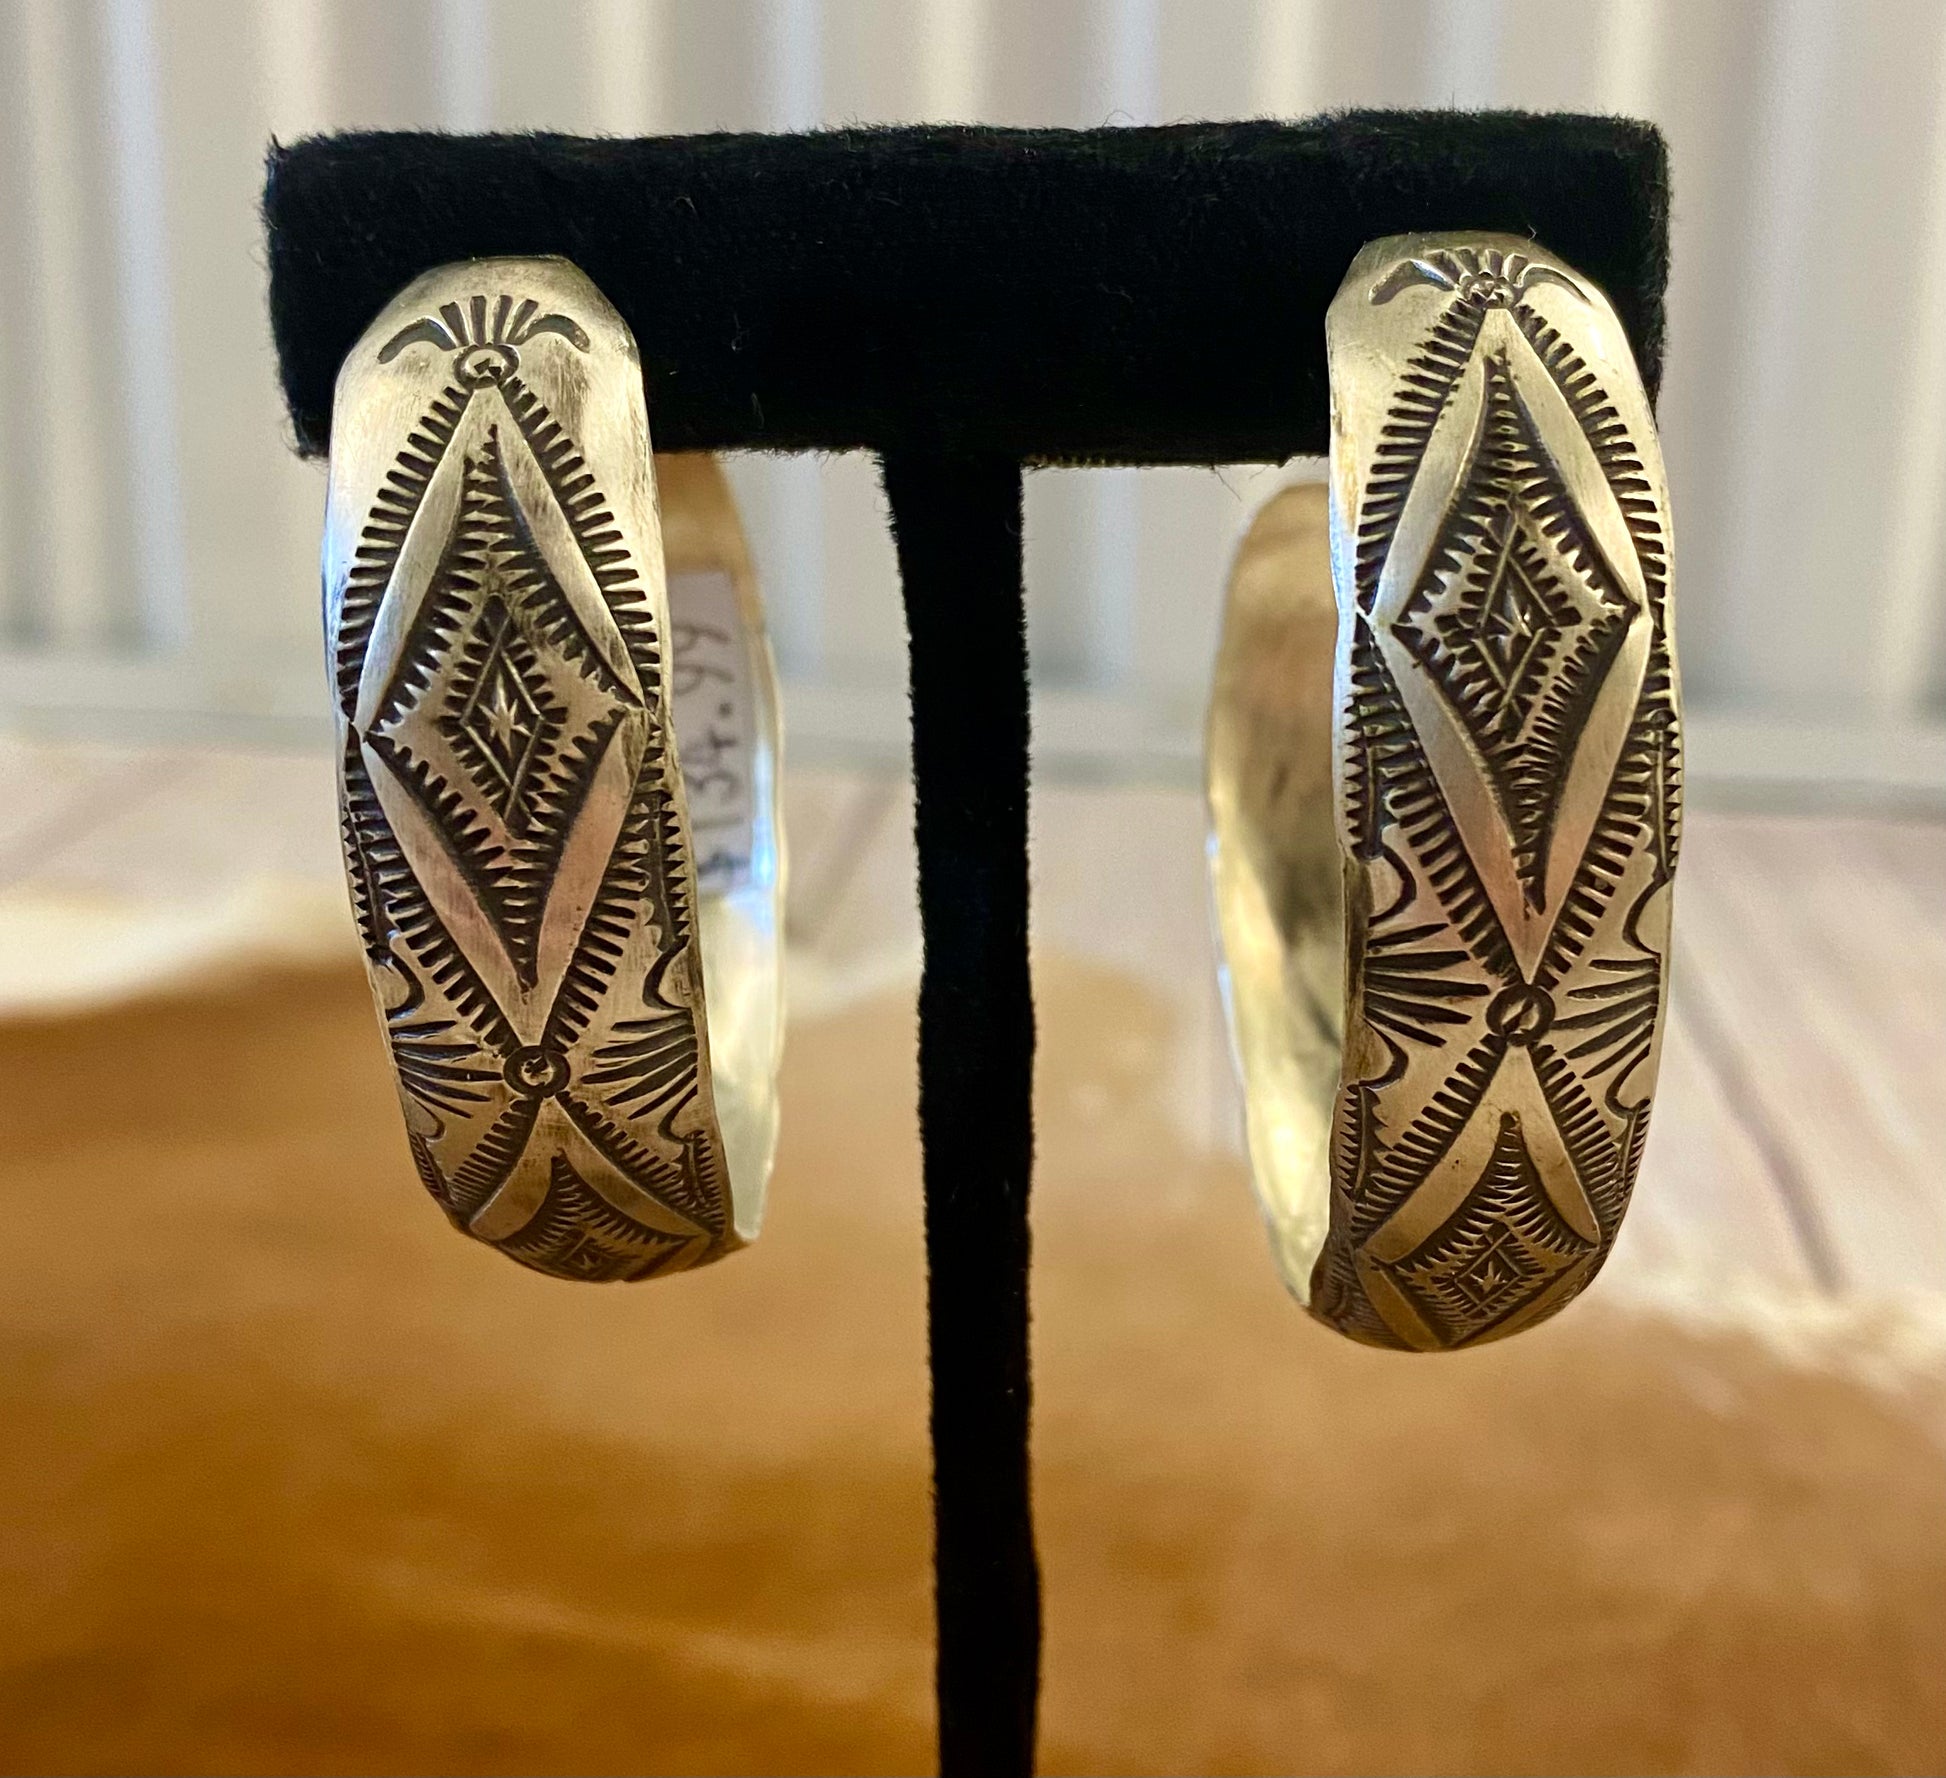 ﻿Stunning large statement Native American made sterling silver half hoop post stamped silver earrings. These are sure to make a statement when being worn with any outfit. They are so simple yet elegant. The perfect addition to anyone's jewelry collection!   Size: 2” inch length  Native American Handmade Stamped Silver Post Half Hoop Unique Earrings 